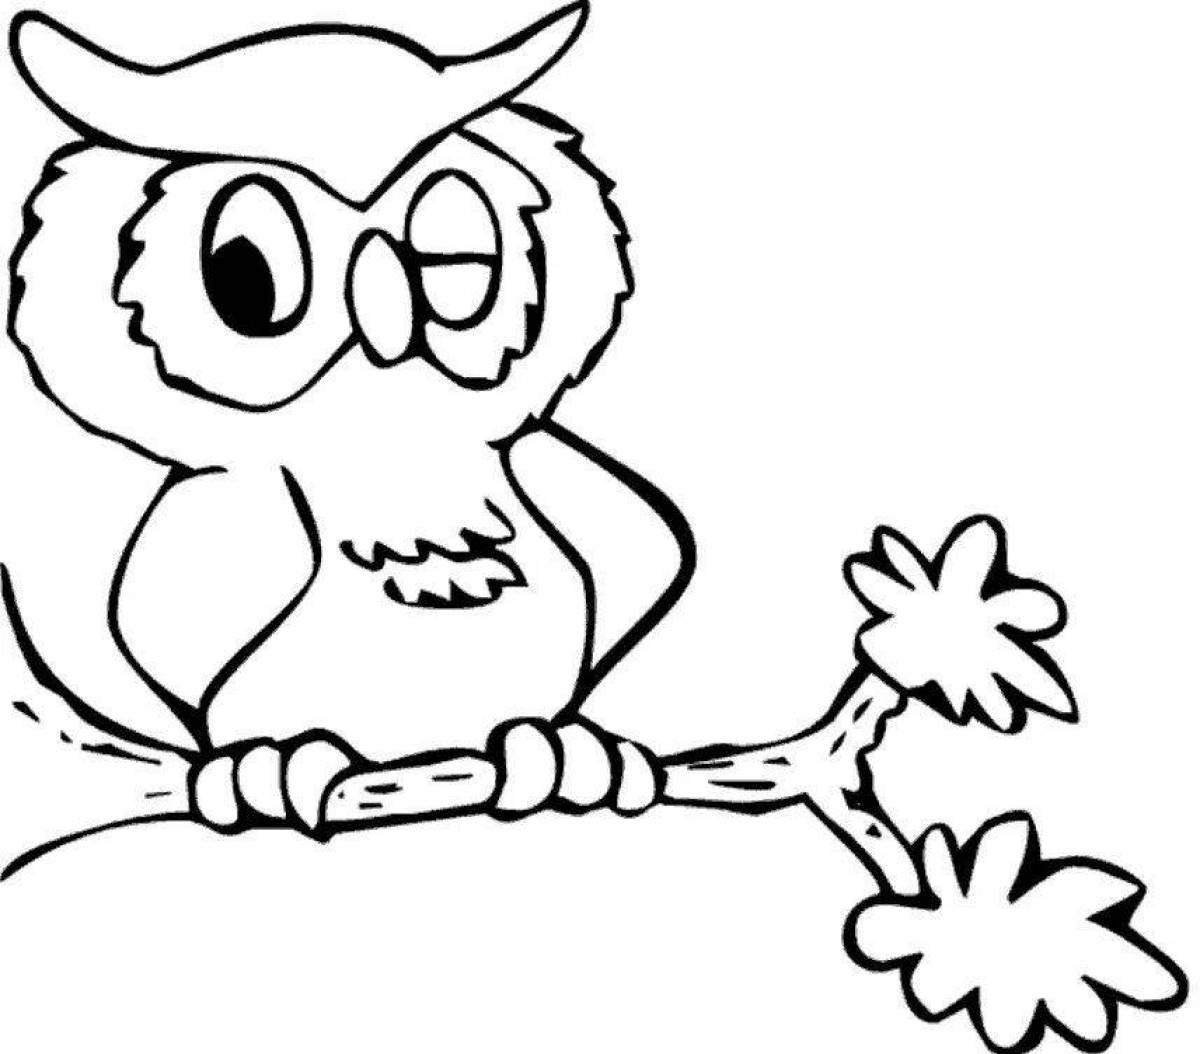 Shiny owl coloring book for kids